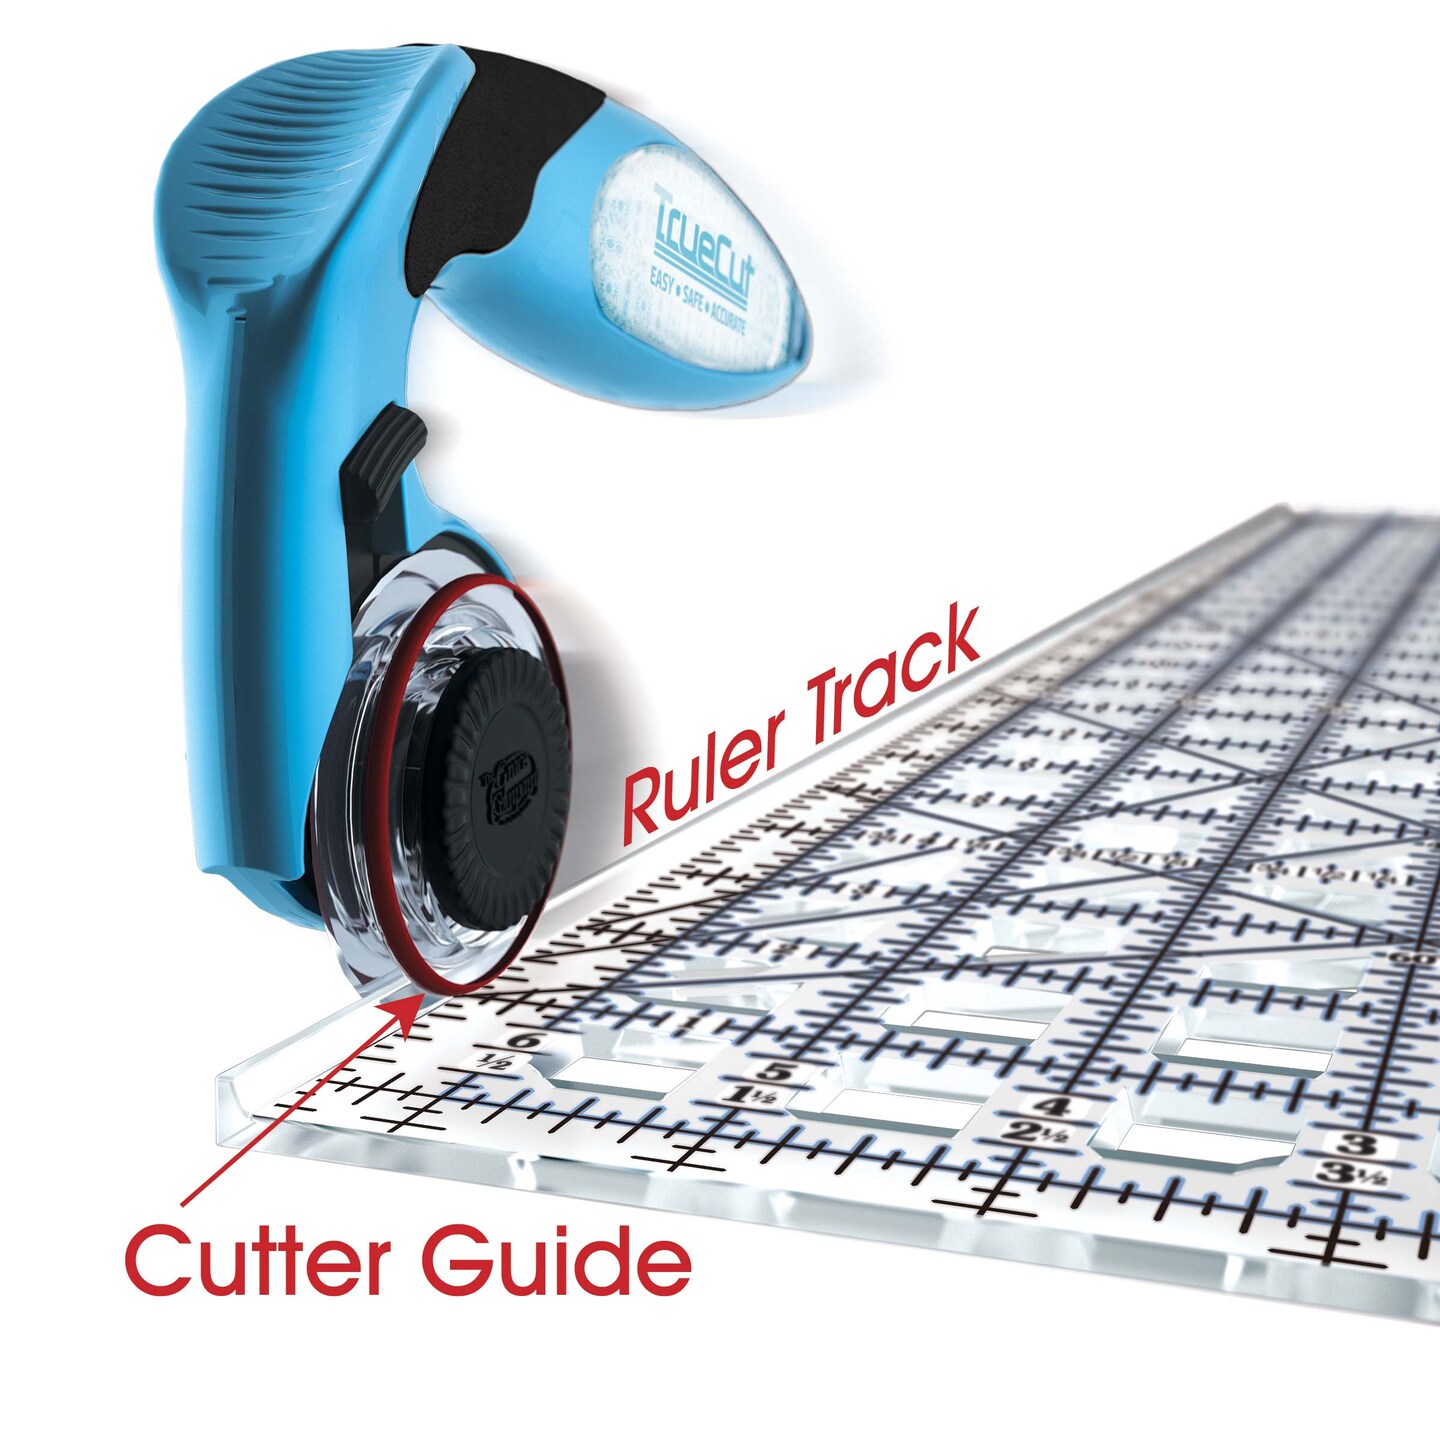 TrueCut Master Ruler Combo with 45mm Rotary Cutter